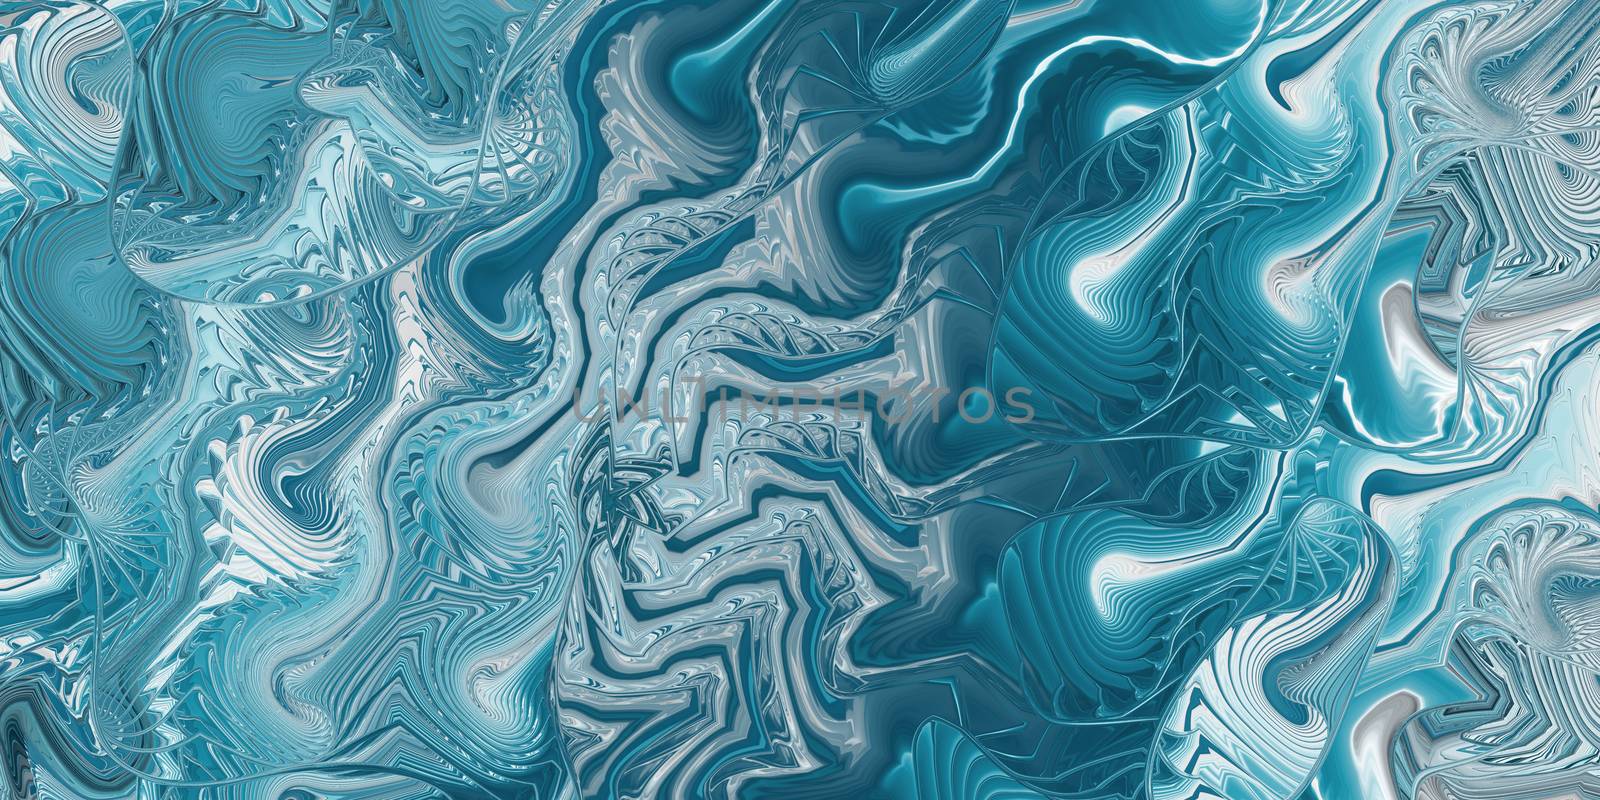 Light Blue Sea Swirls Background. Abstract Ocean Marbling Curves Texture. Nautical Spiral Shell Infinity Backdrop. by sanches812